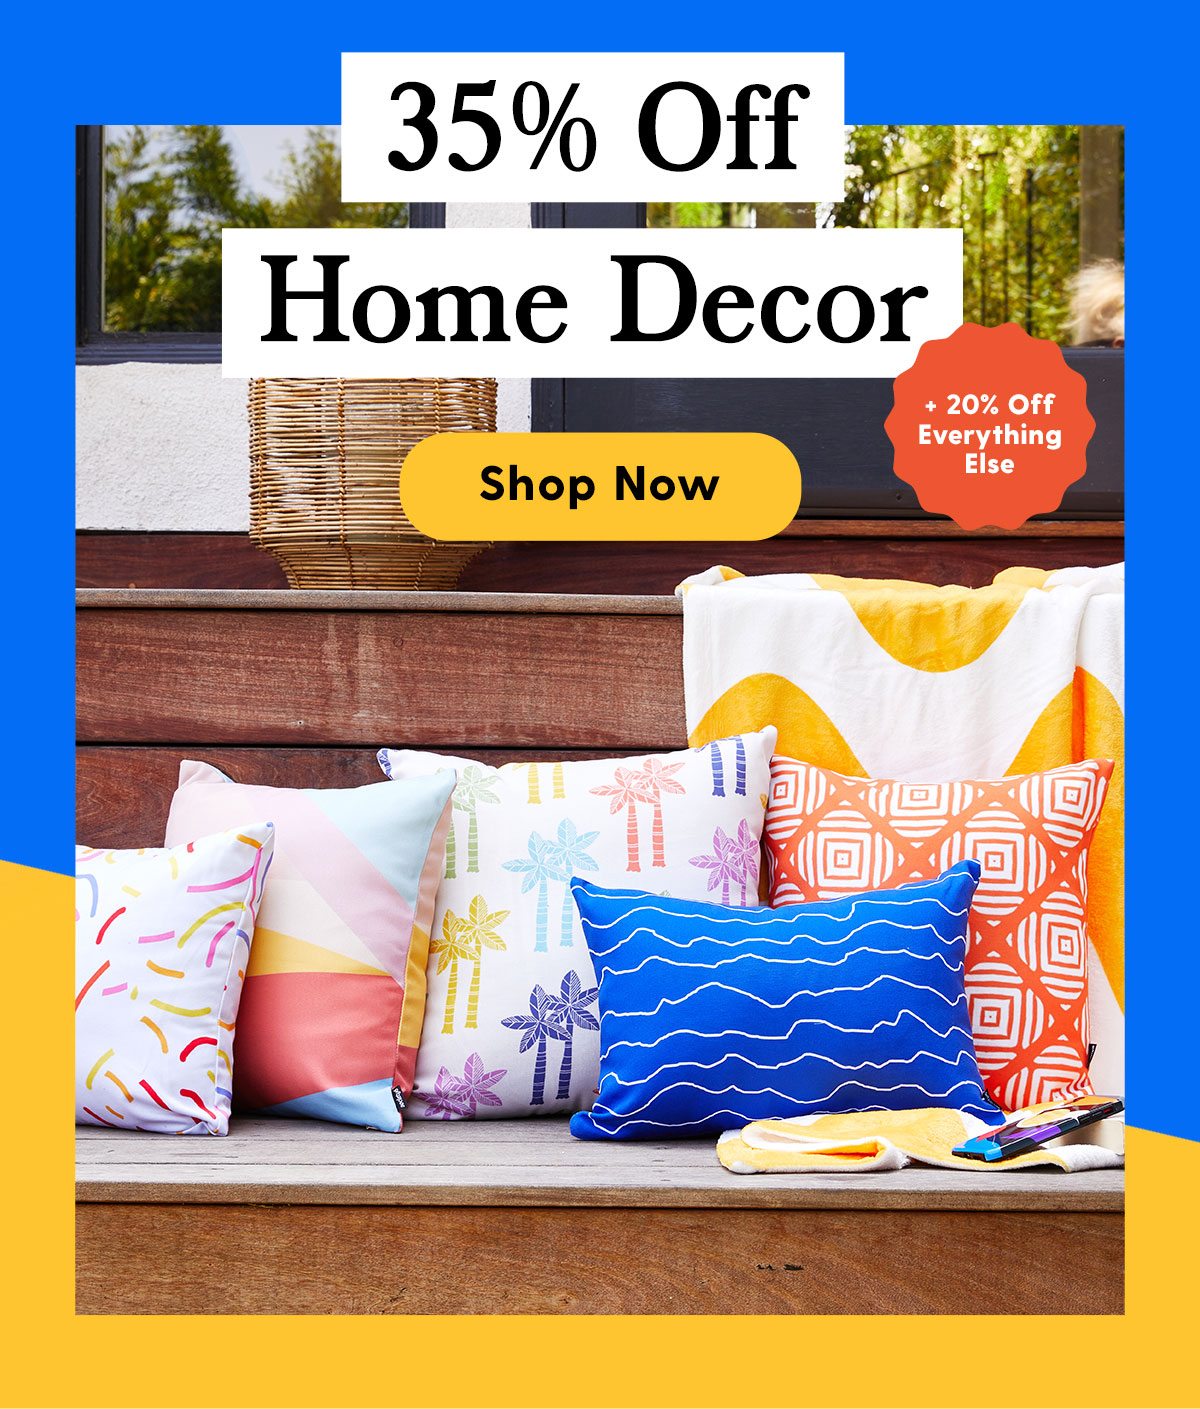 35% Off Home Decor (+ 20% Off Everything Else). Shop Now